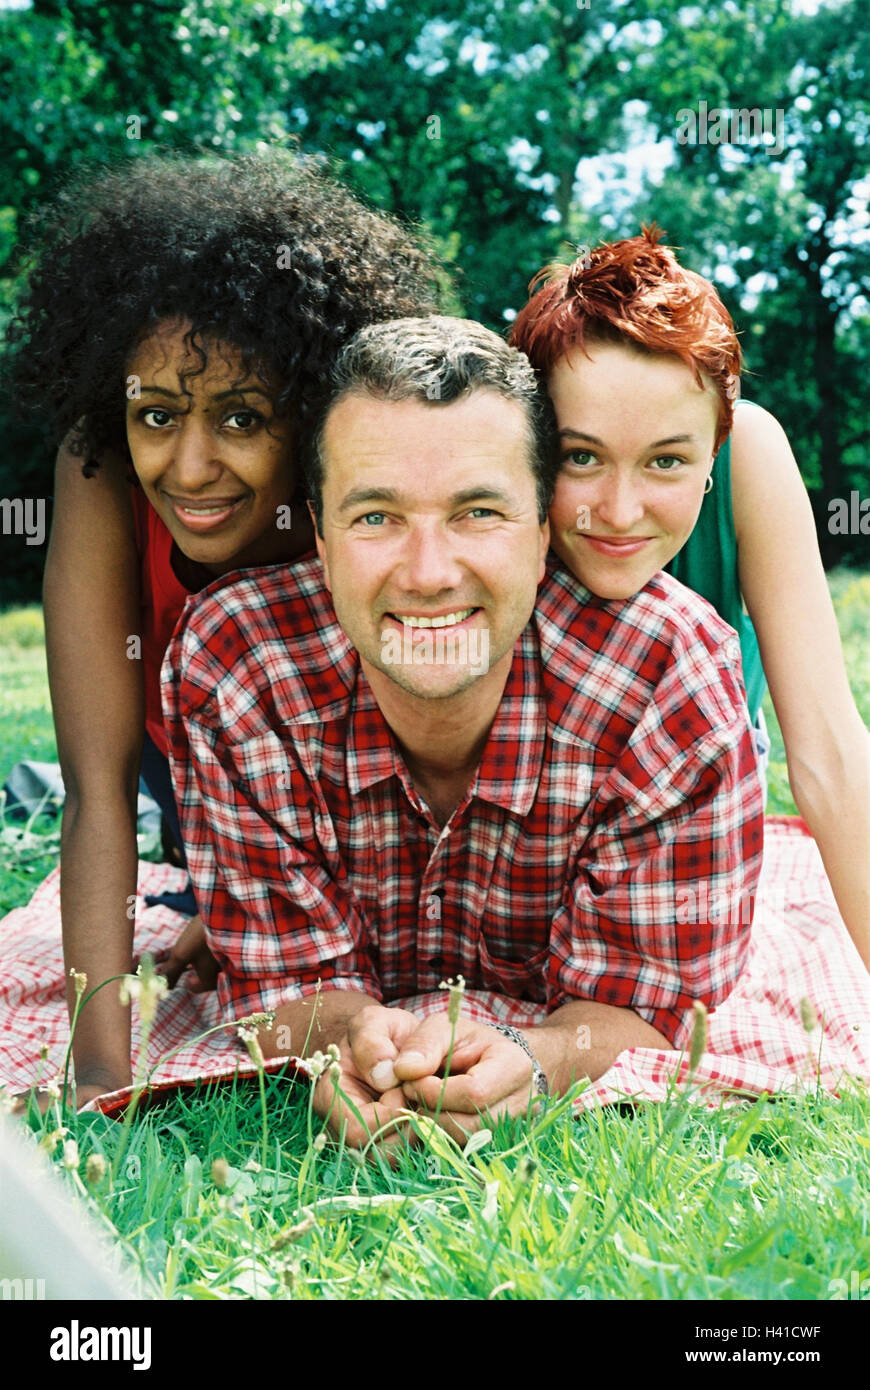 Man, women, skin colour, differently, meadow, lie, enjoy, happy, friends, clique, friendship, summer, outside, caps, leisure time, recreation, rest, relax, smile lighthearted, happily, Stock Photo